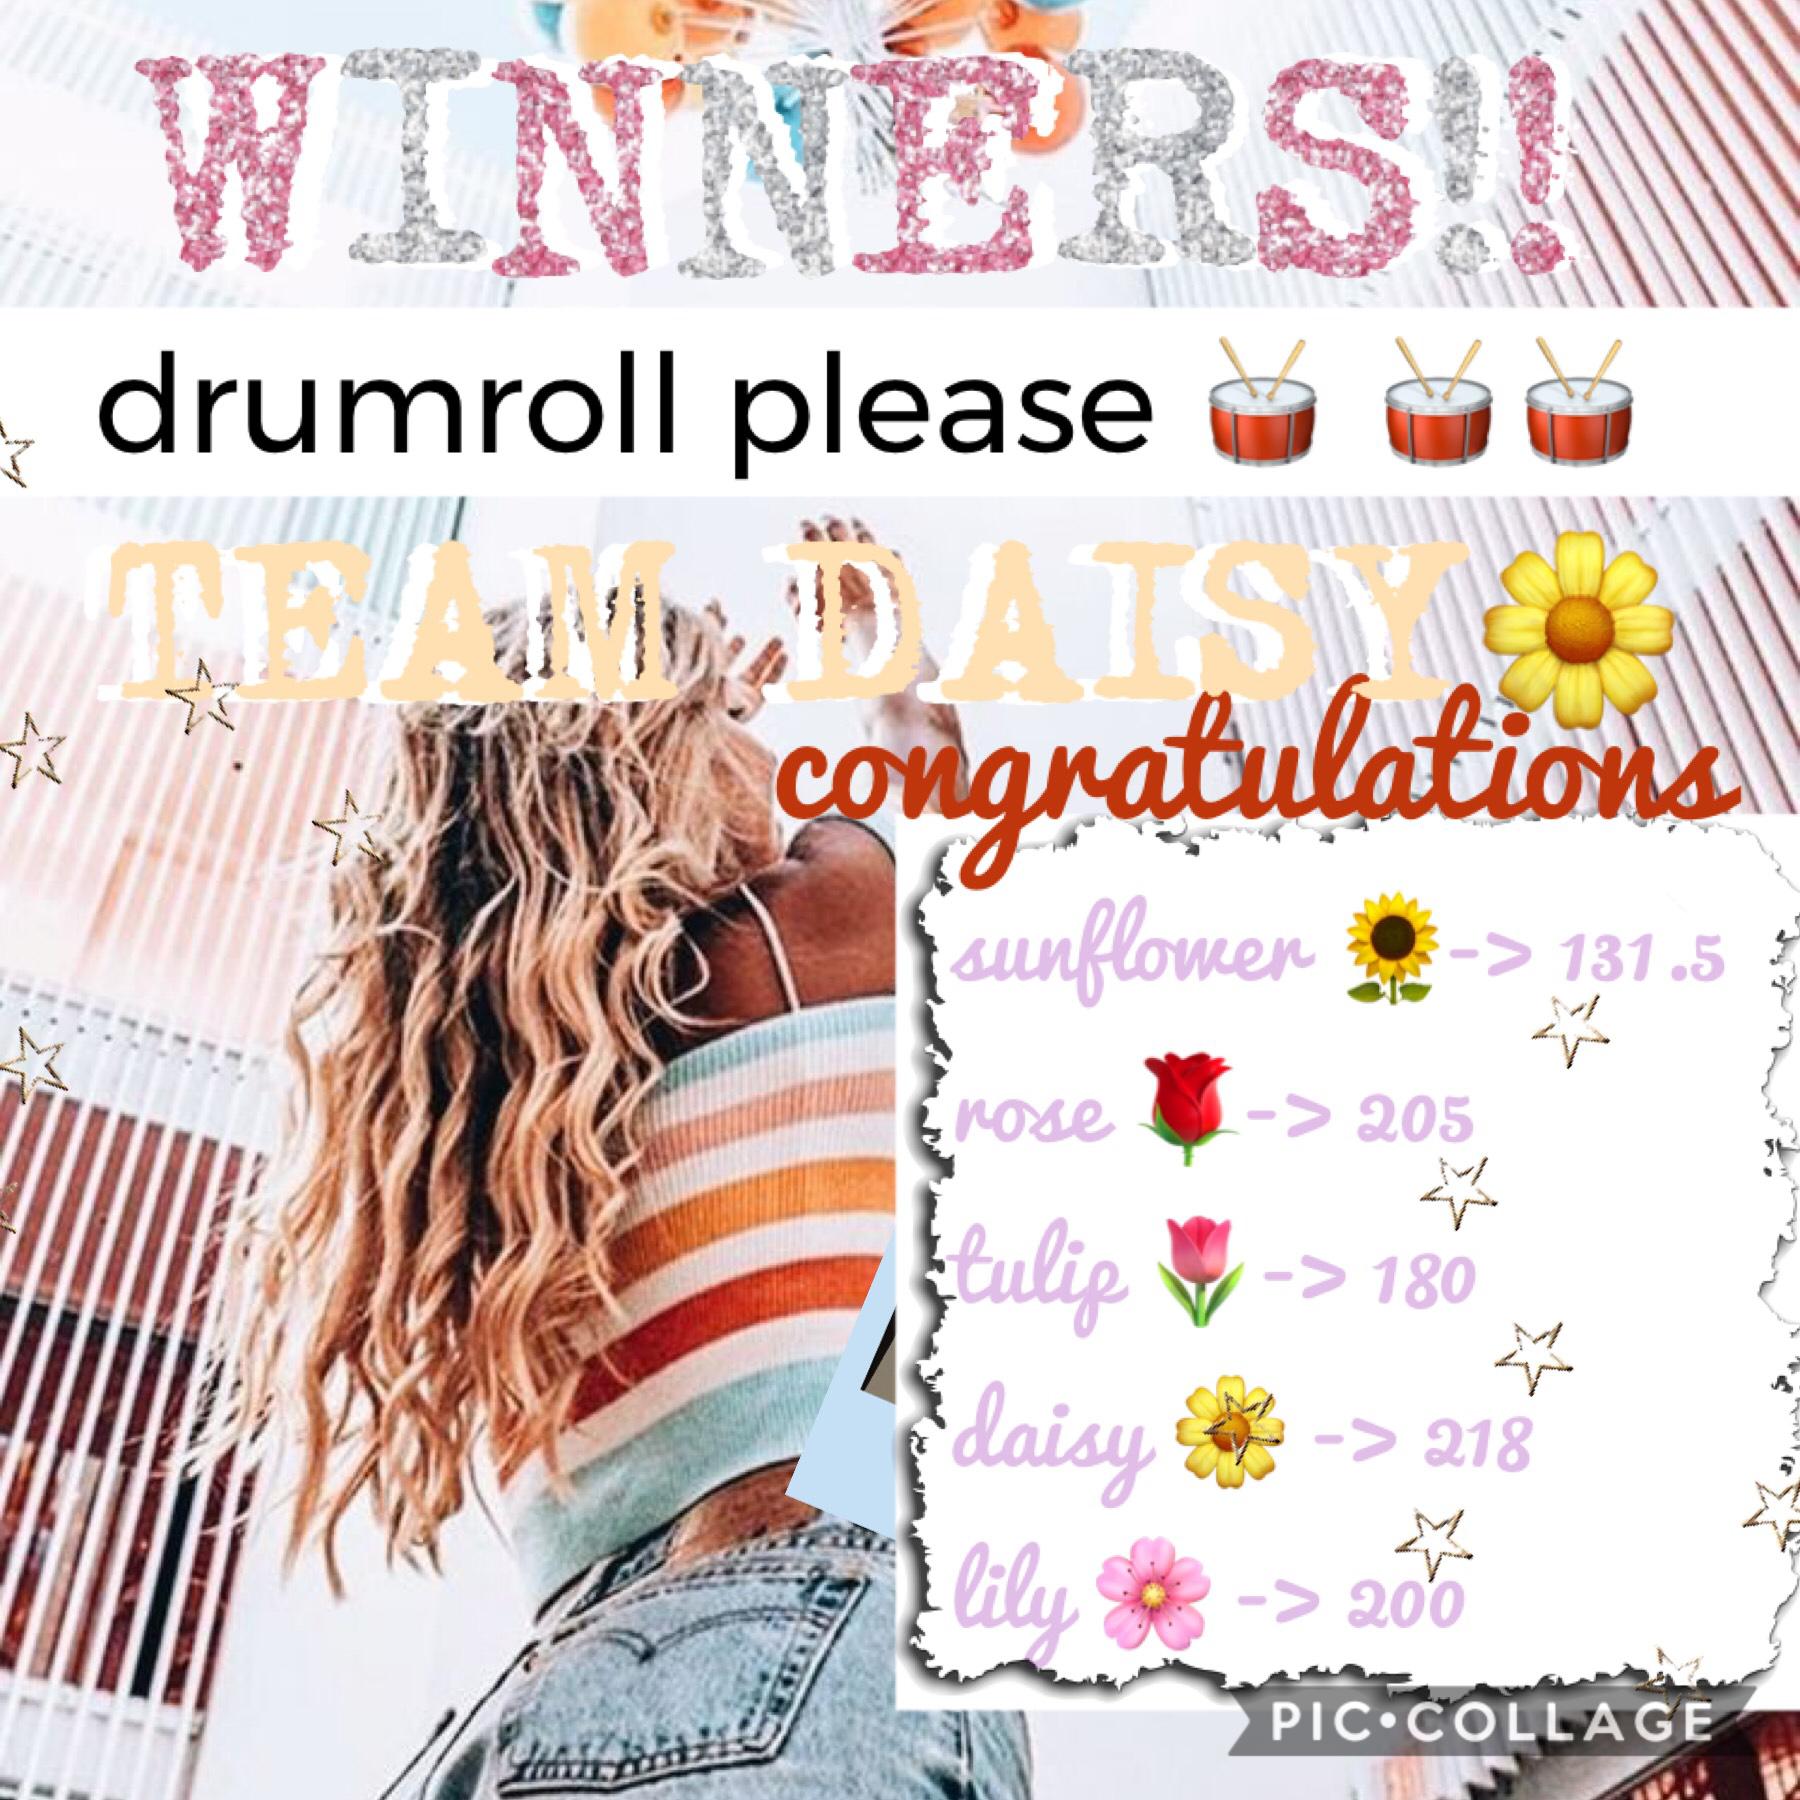 THE WINNER!! CONGRATULATIONS!! Please remix your prizes and we will hand our prizes asap❤️❤️